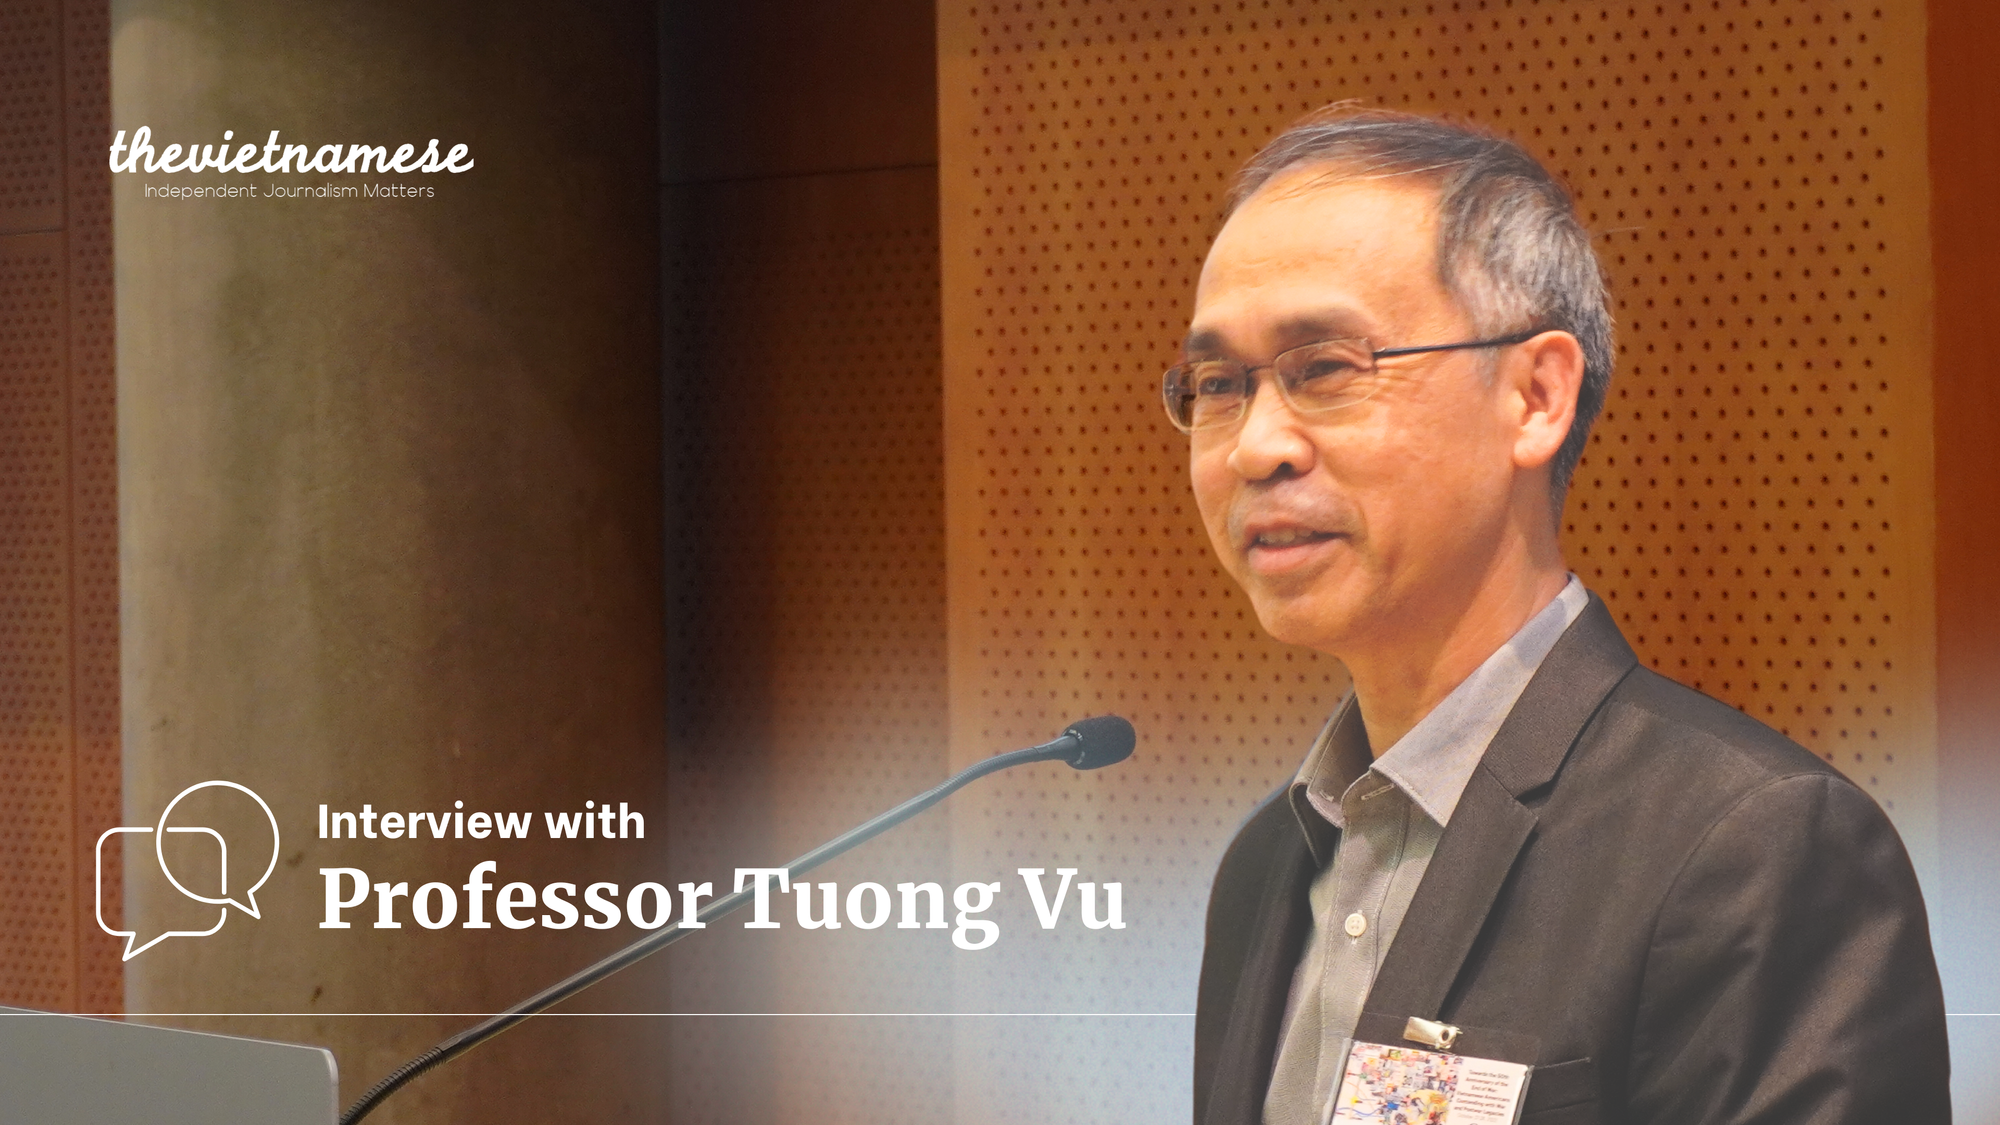 Interview with Professor Tuong Vu on the Vietnamese Communist Party: War Legacies and Future Prospects